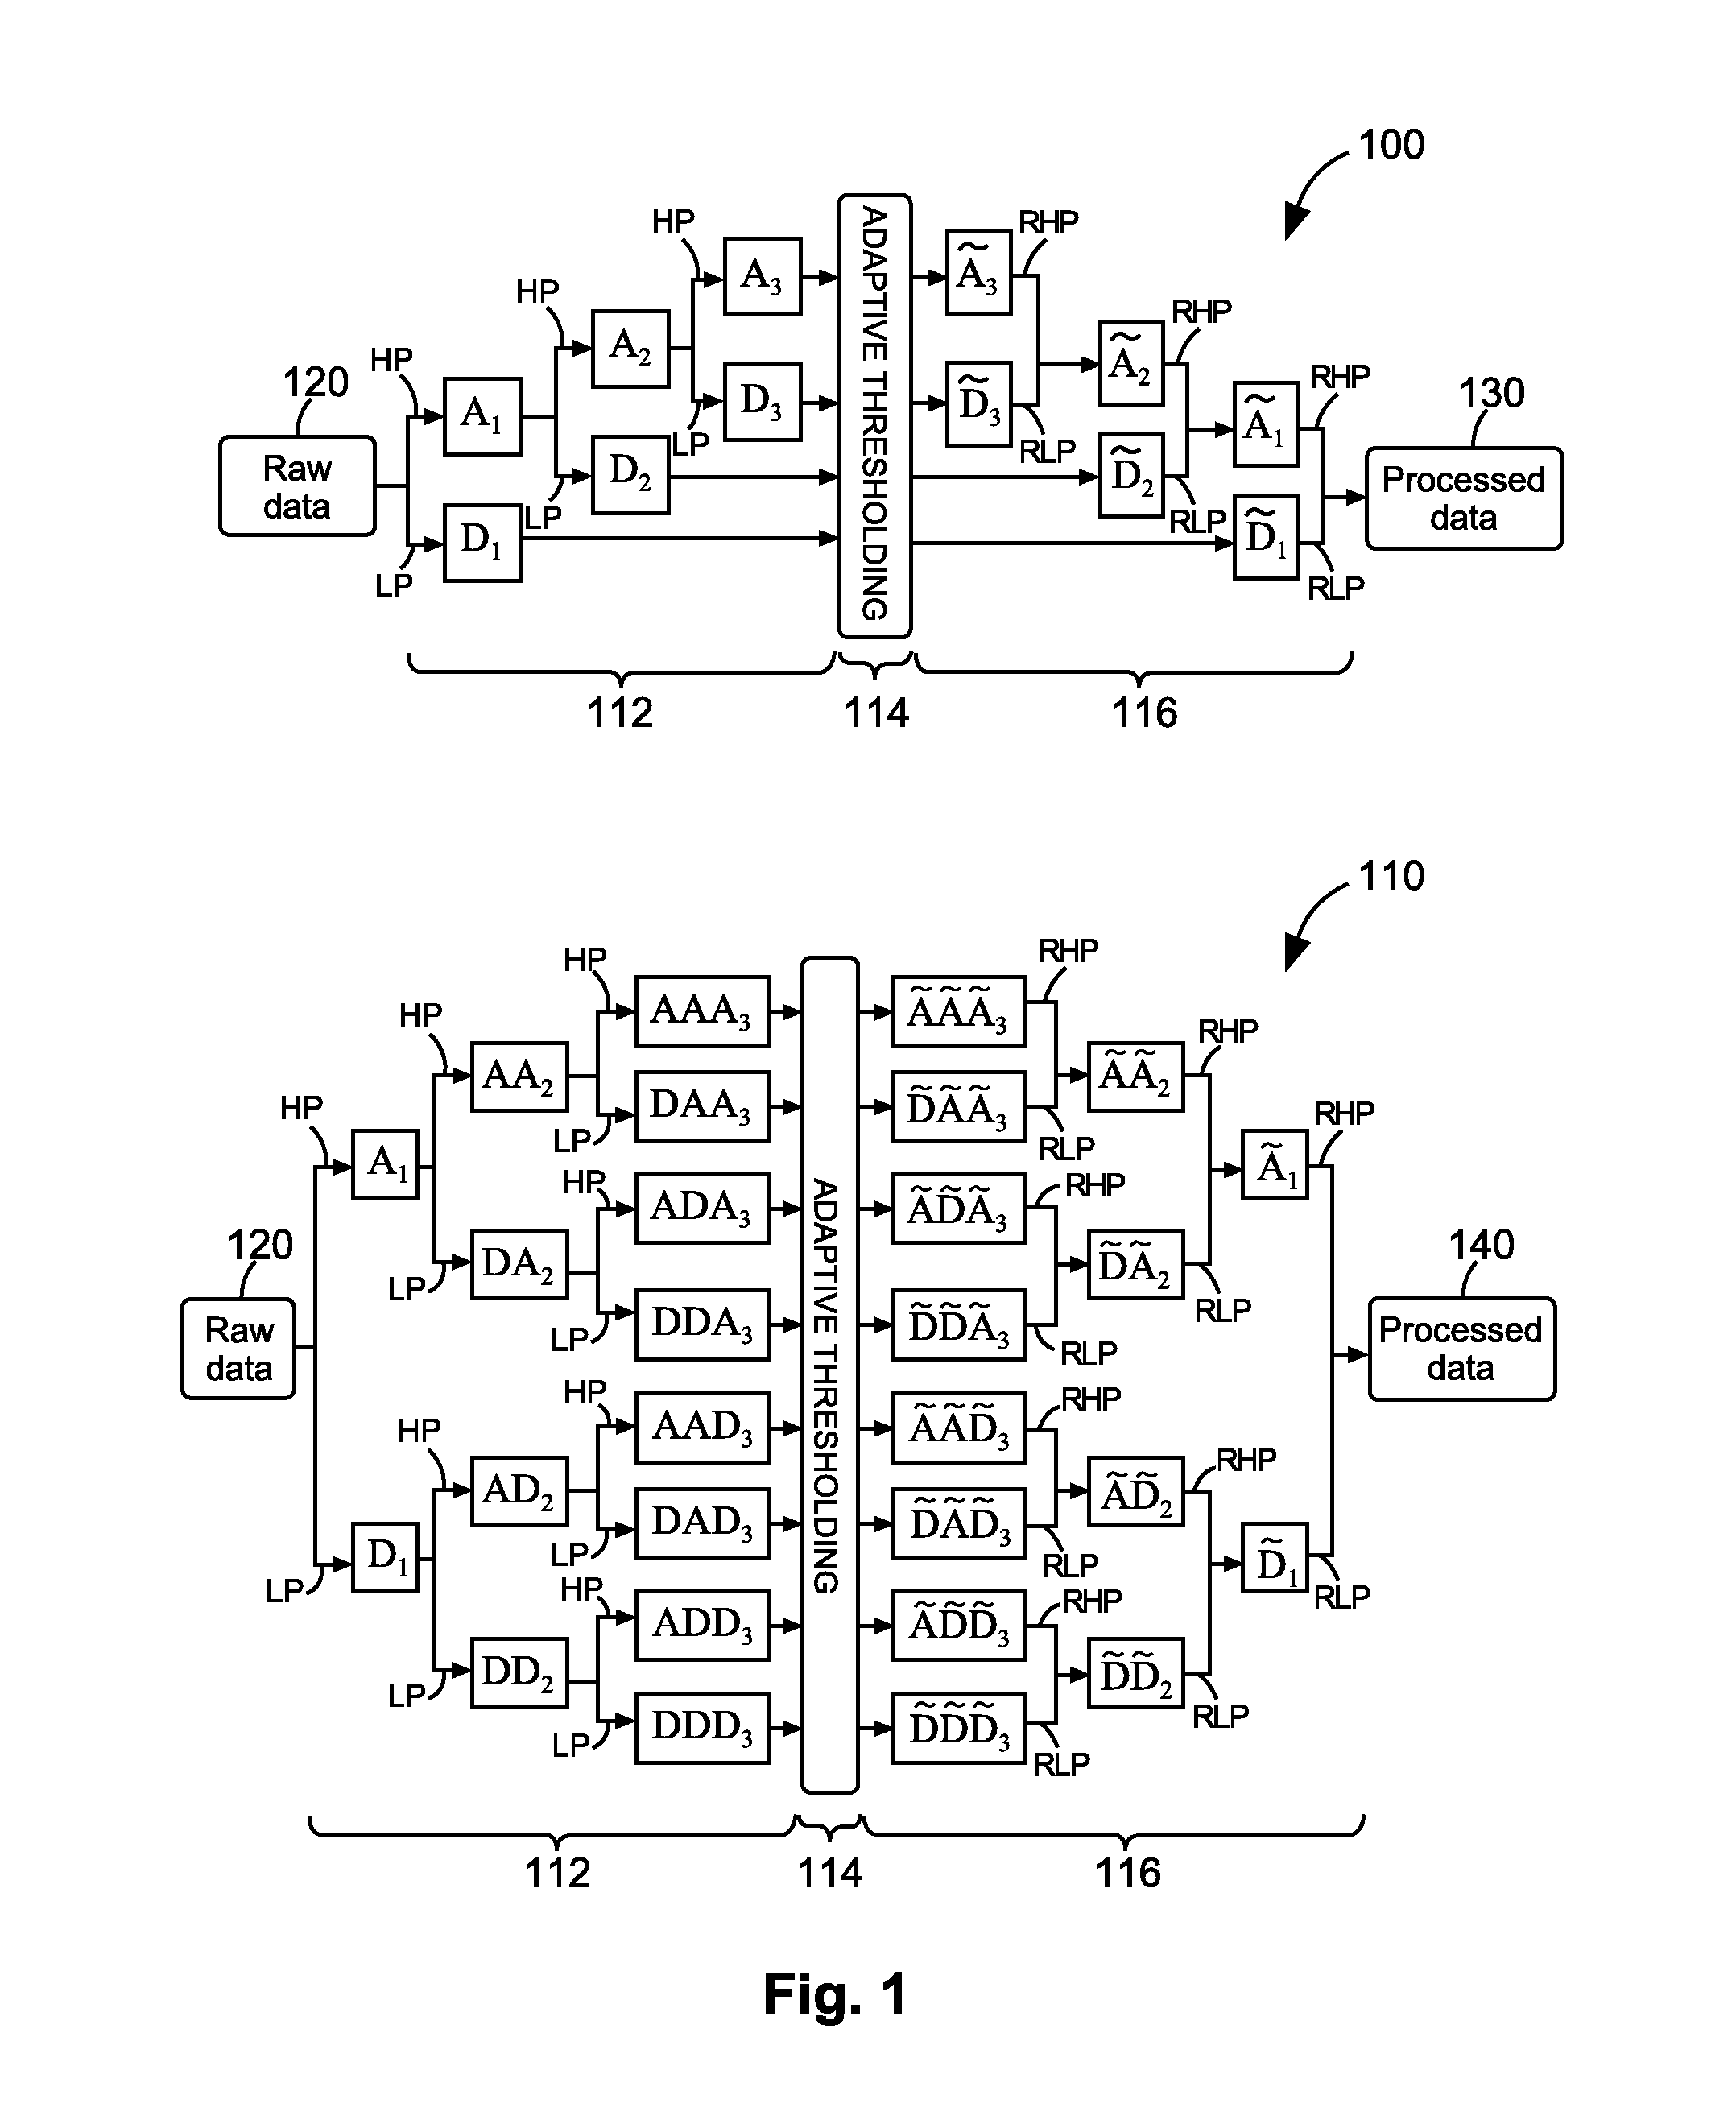 Measurement transformation apparatus, methods, and systems